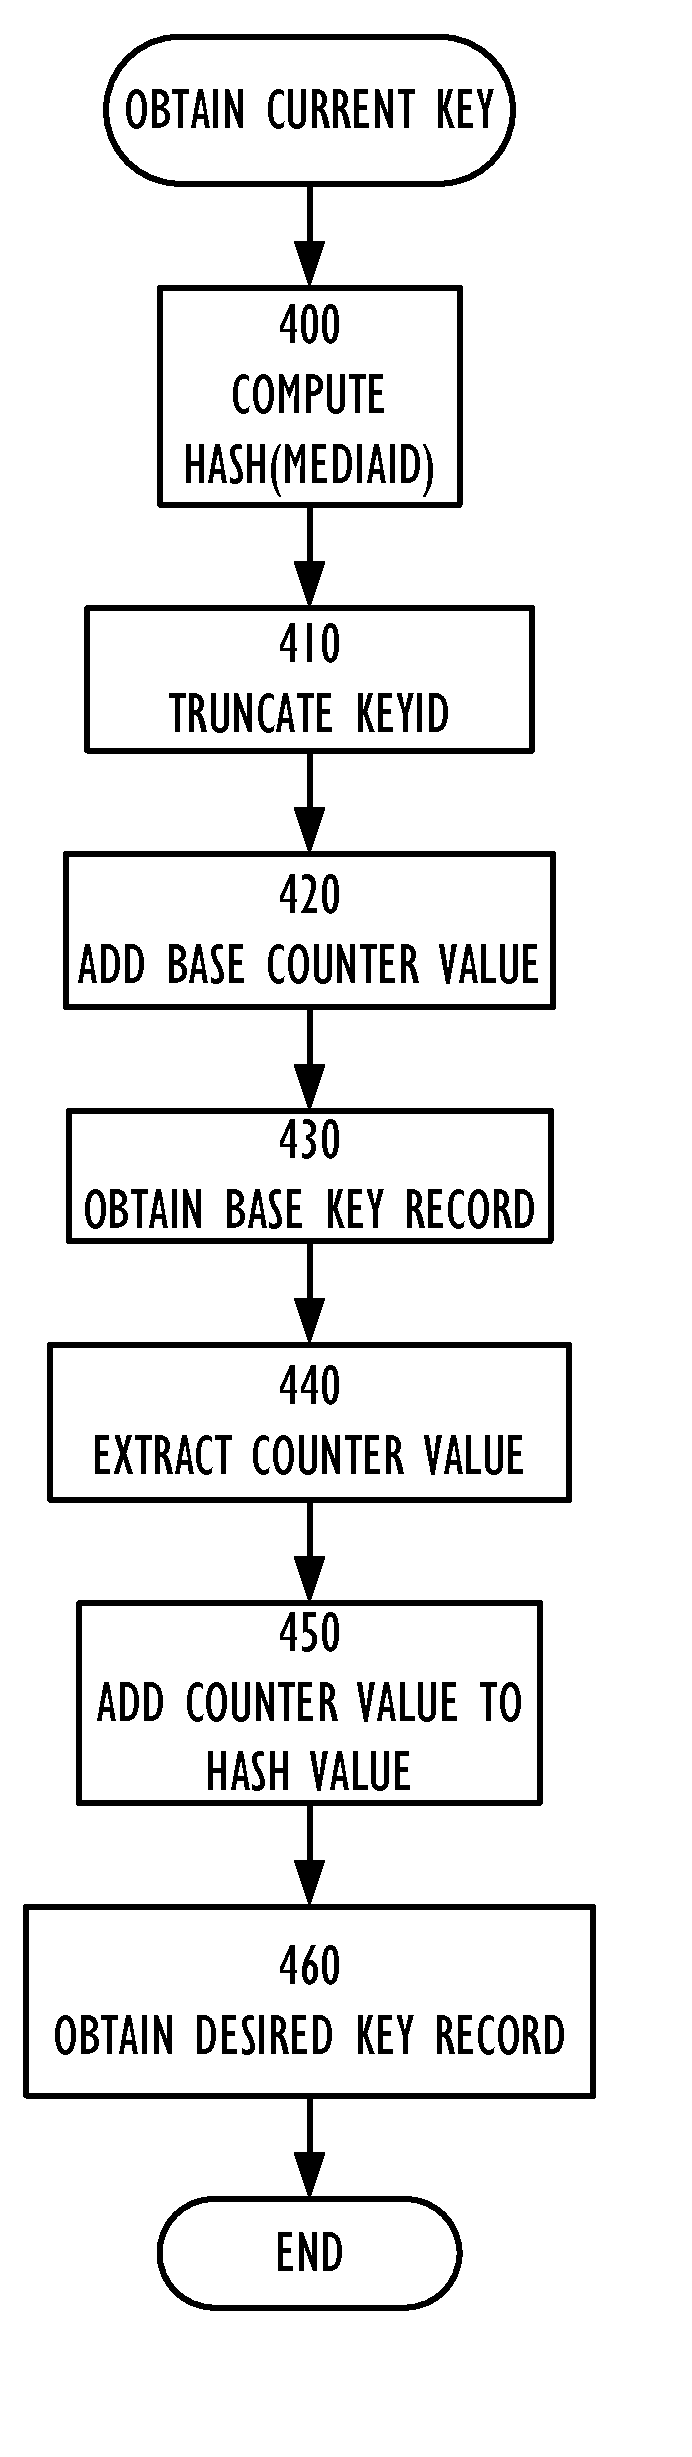 Developing initial and subsequent keyid information from a unique mediaid value